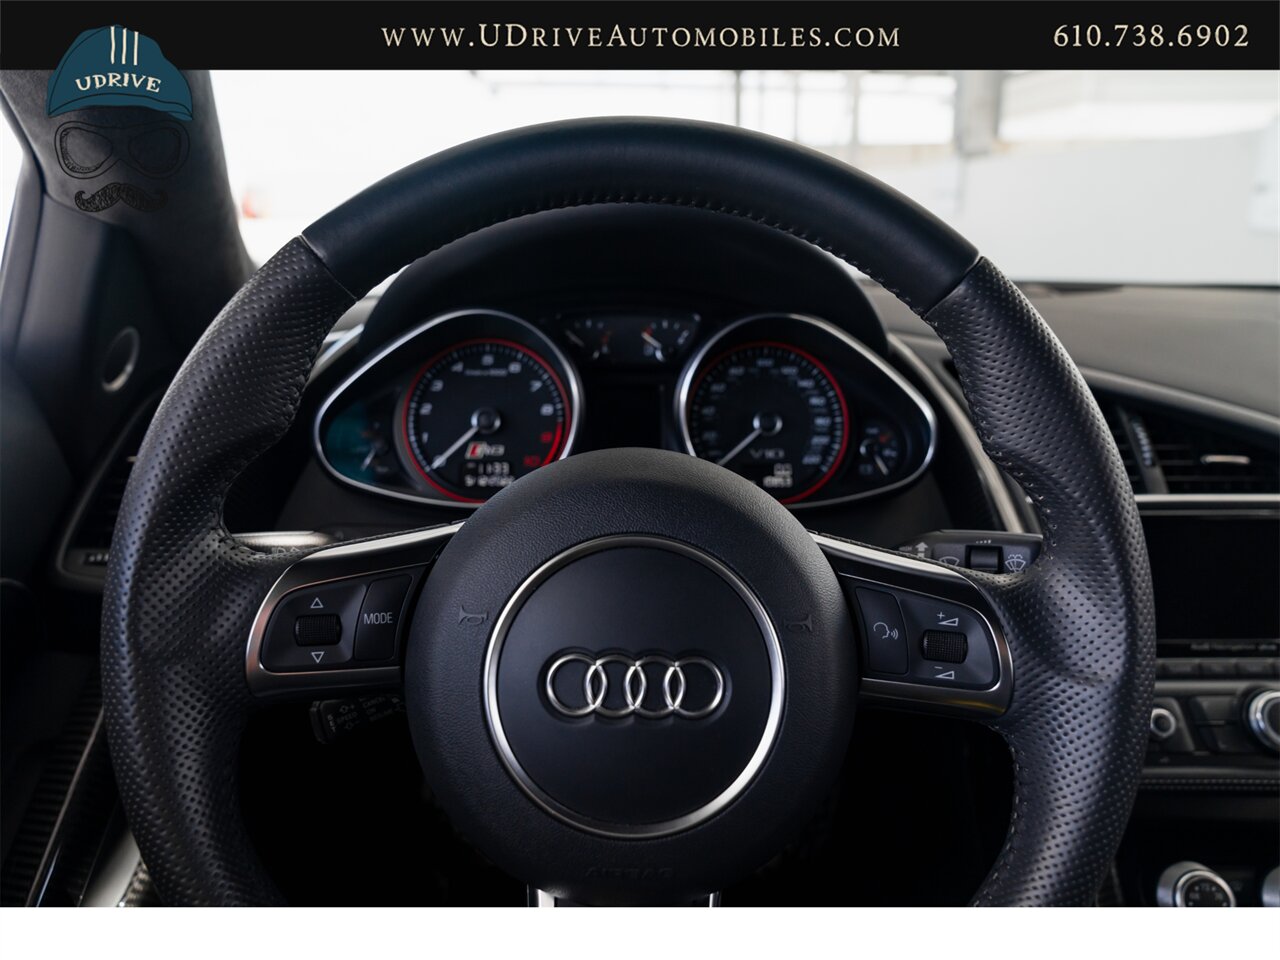 2015 Audi R8 5.2 V10 Quattro 6 Speed Manual 10k Miles  Diamond Stitched Leather 1 of 2 - Photo 32 - West Chester, PA 19382